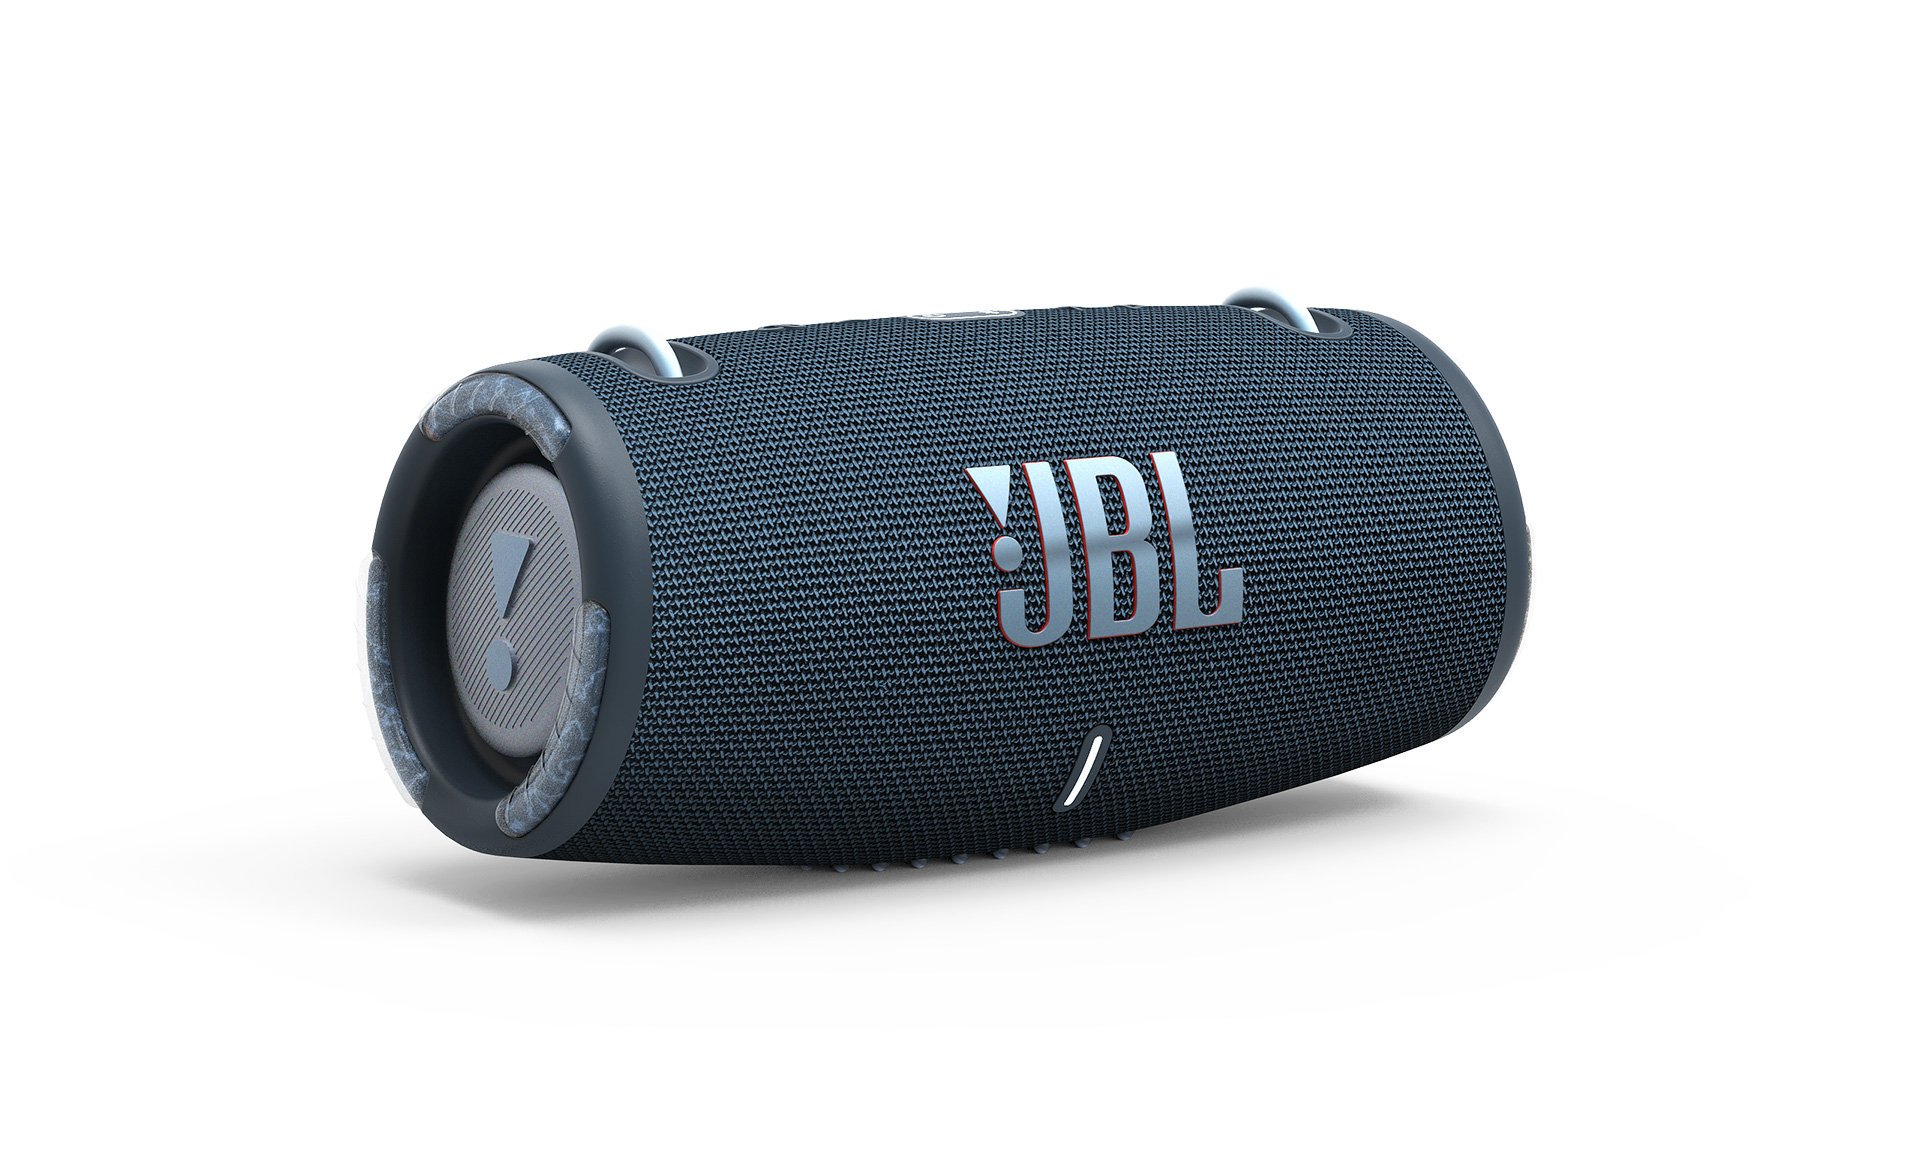 A product render of the jbl xtreme 3 water and dust-resistant speaker in navy against a white background.